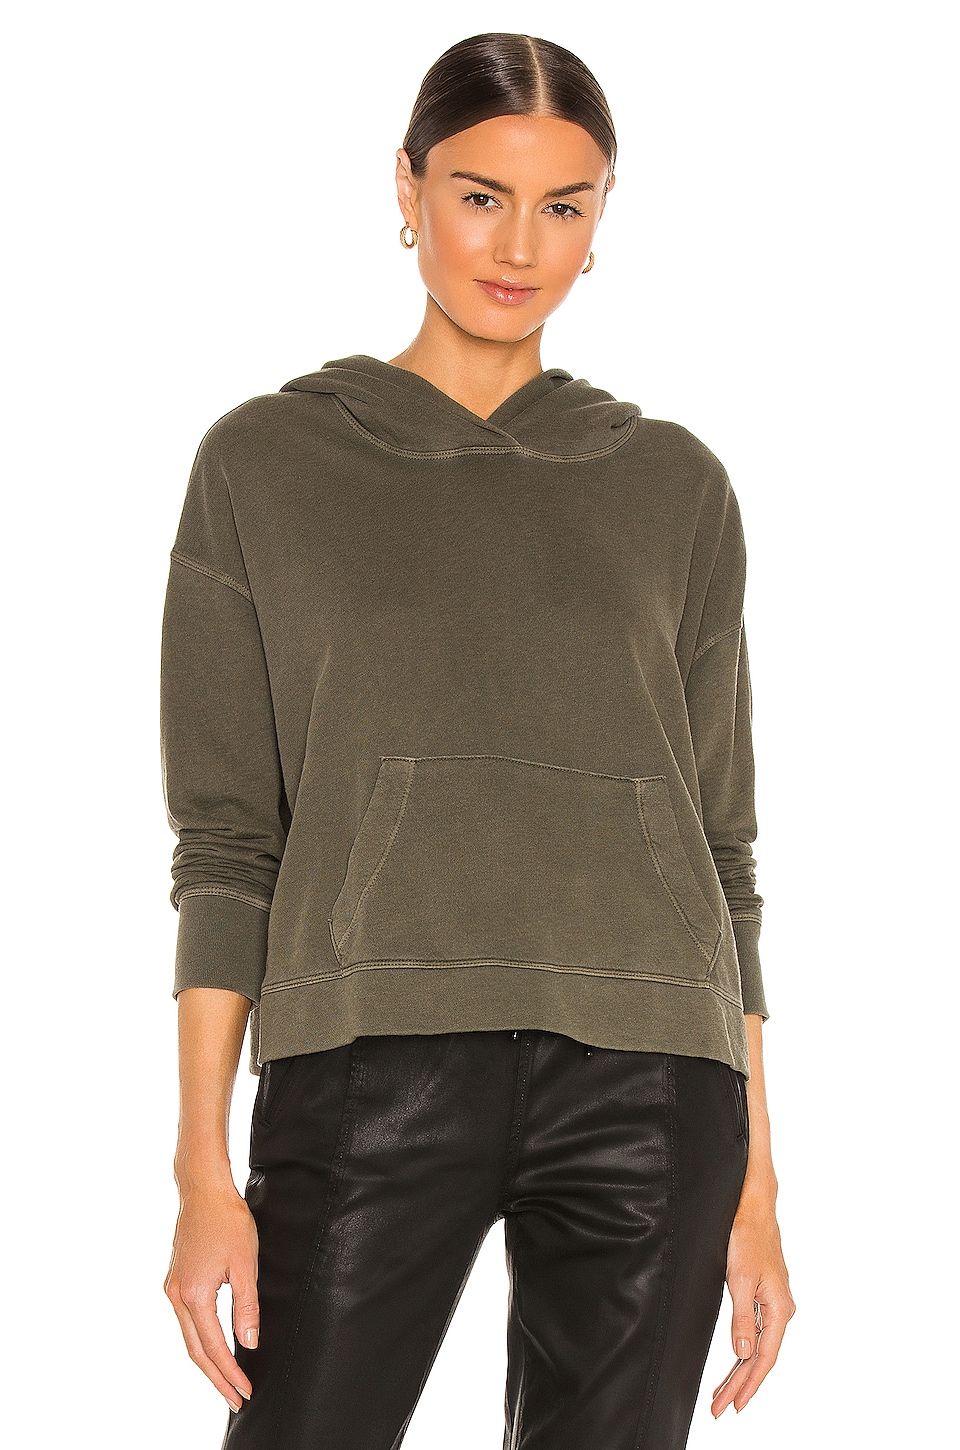 James Perse Relaxed Crop Hoodie in Army Green | REVOLVE